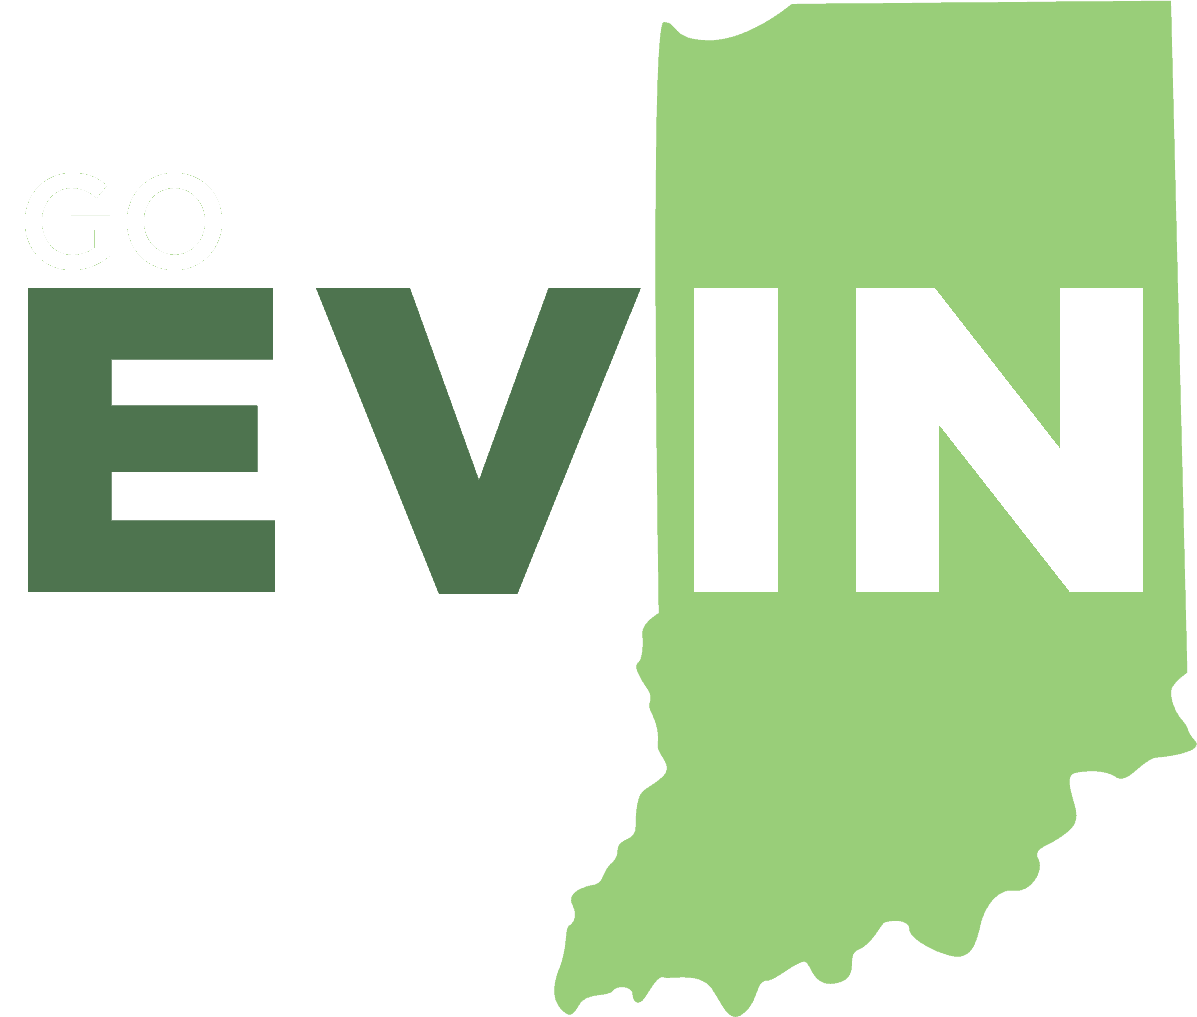 Go evin logo on a green background.